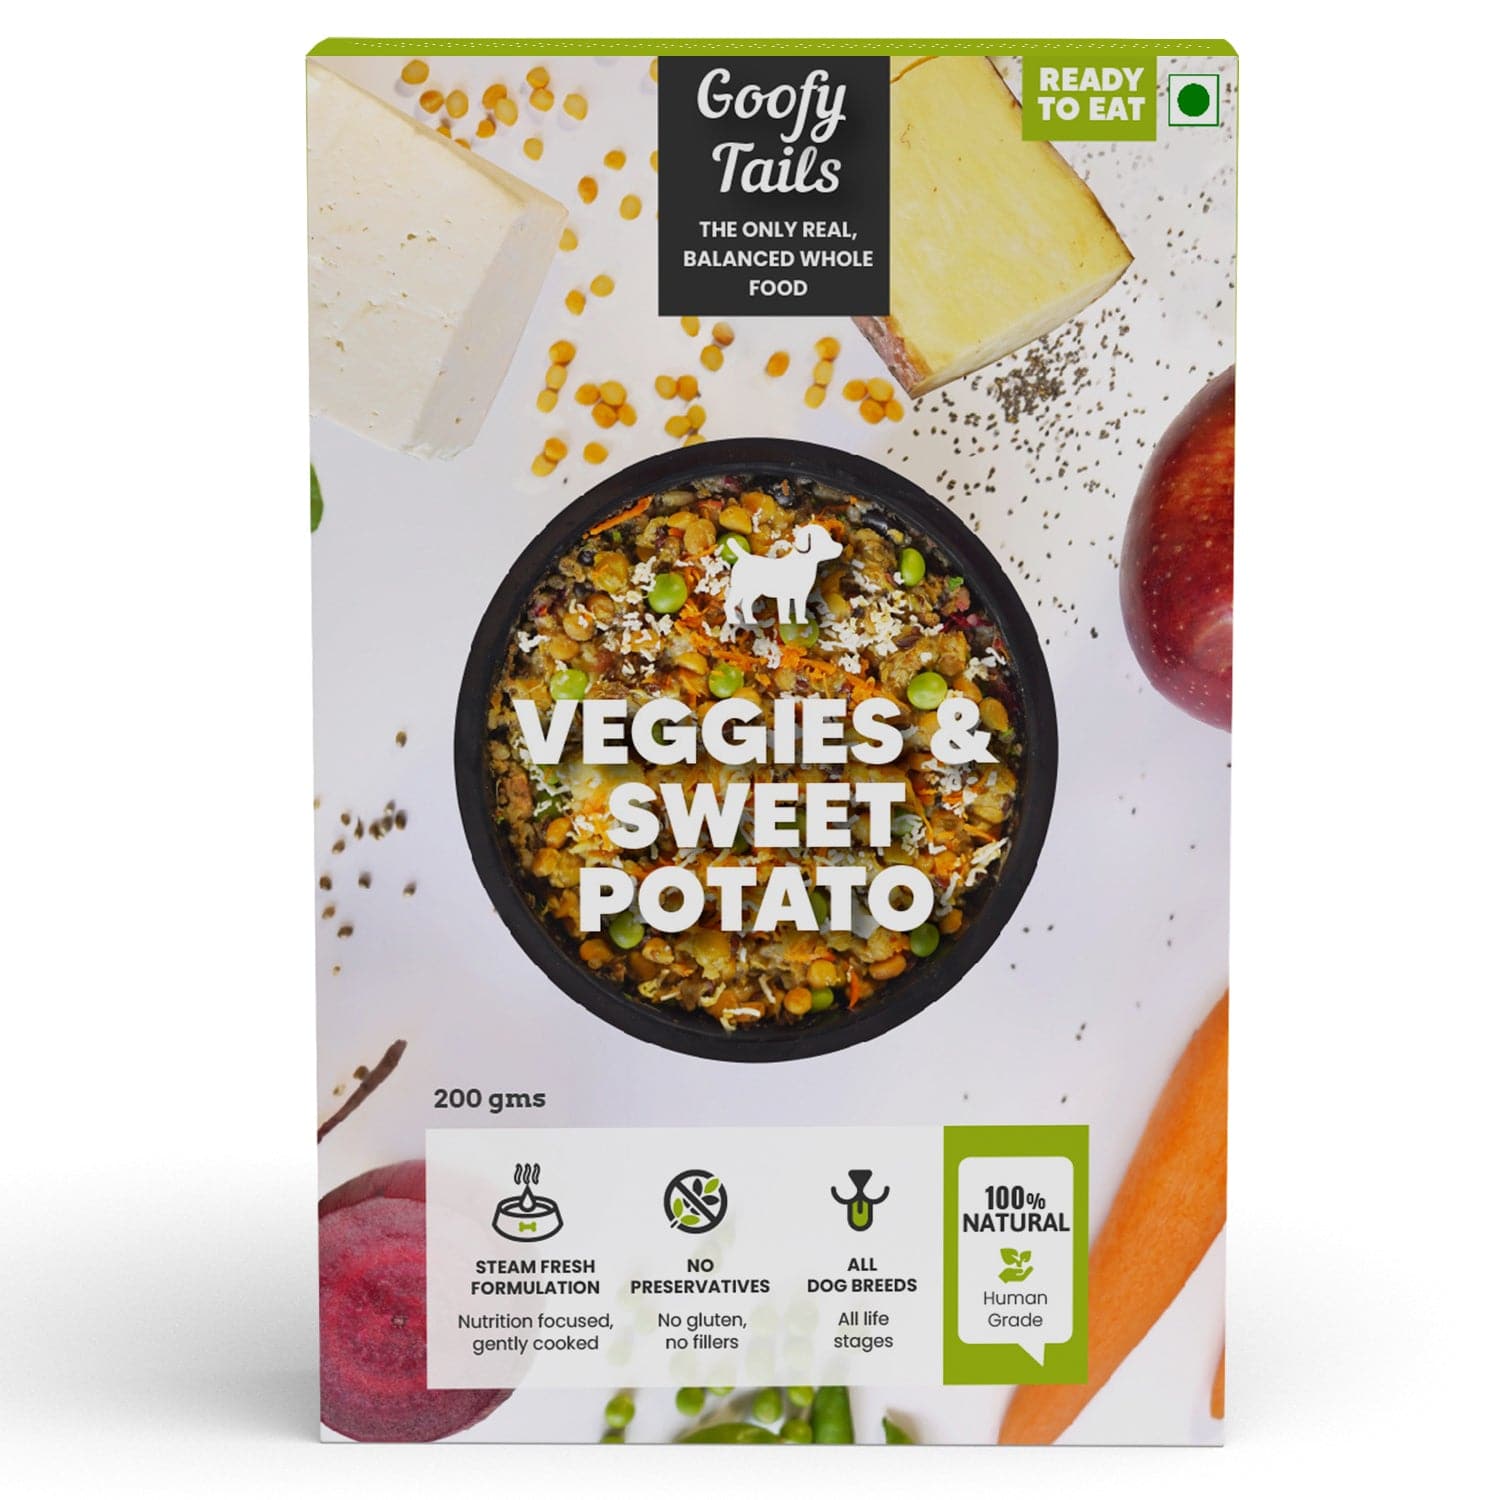 Goofy Fresh 4 Tester Pack of Ready-to- Eat Meal + Bone Broth (7331321774230)